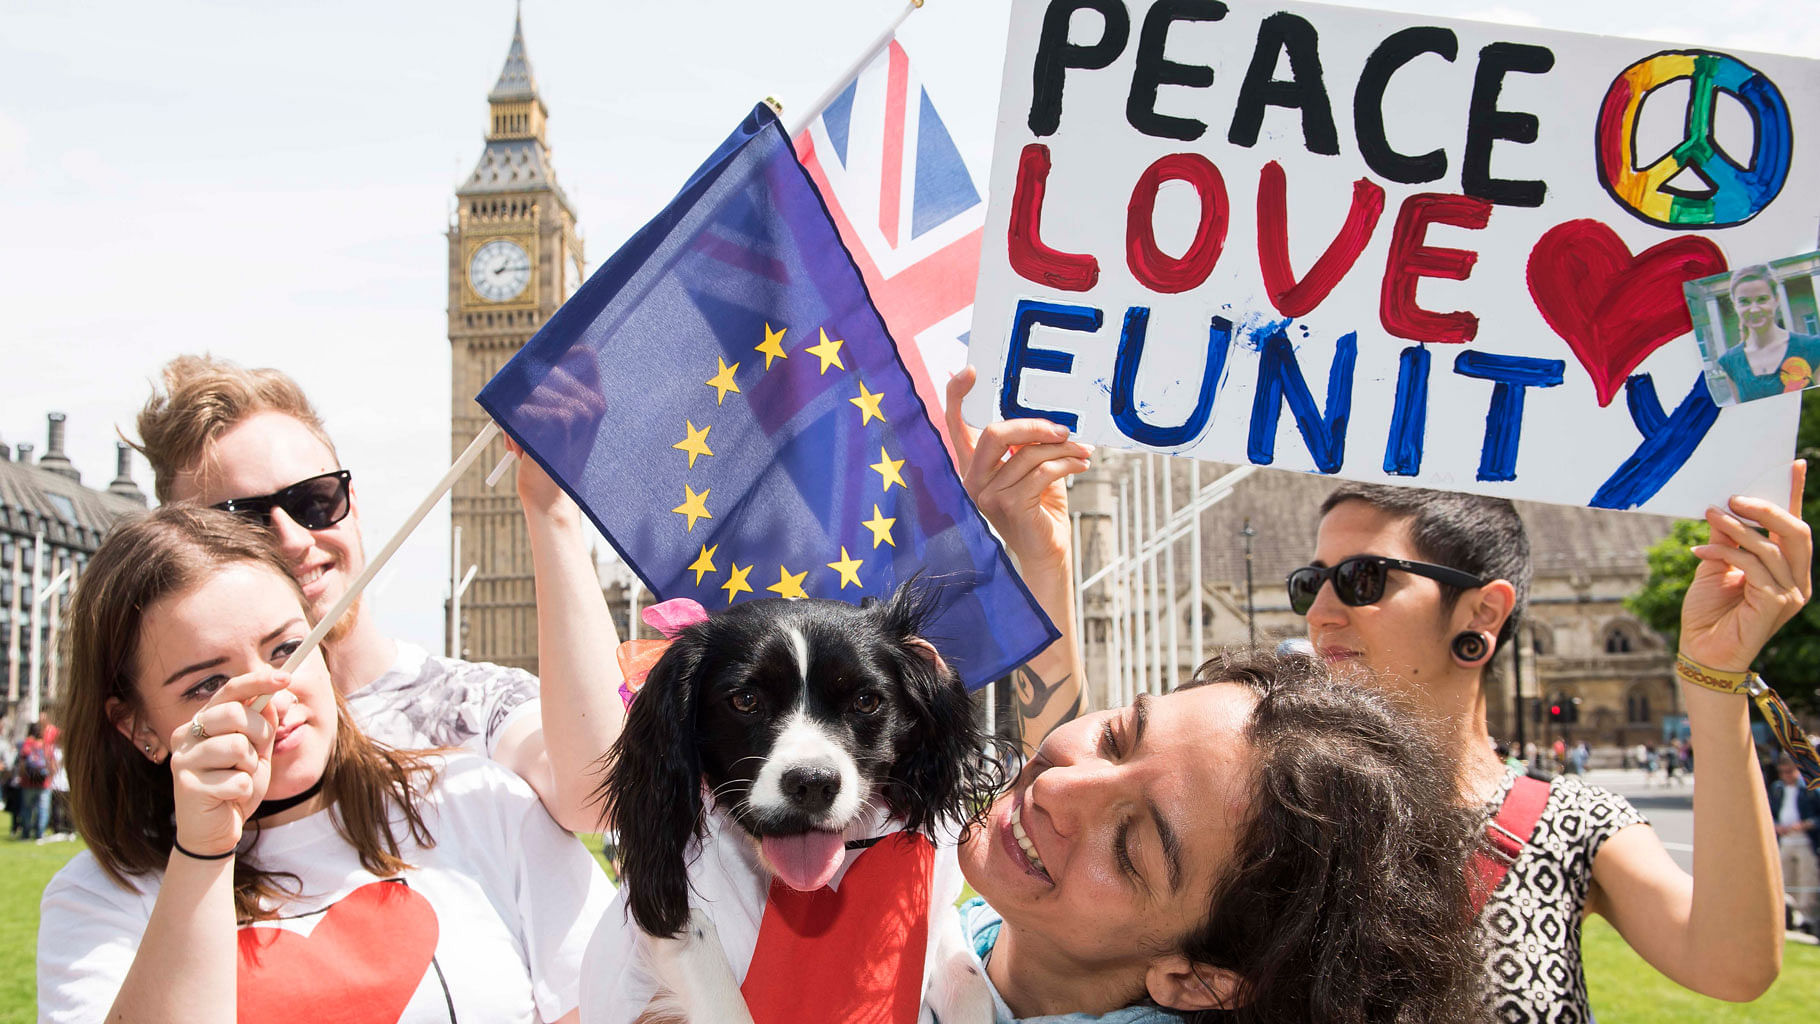 People gather to spread peace, love and unity ahead of the Brexit vote. (Photo: AP)